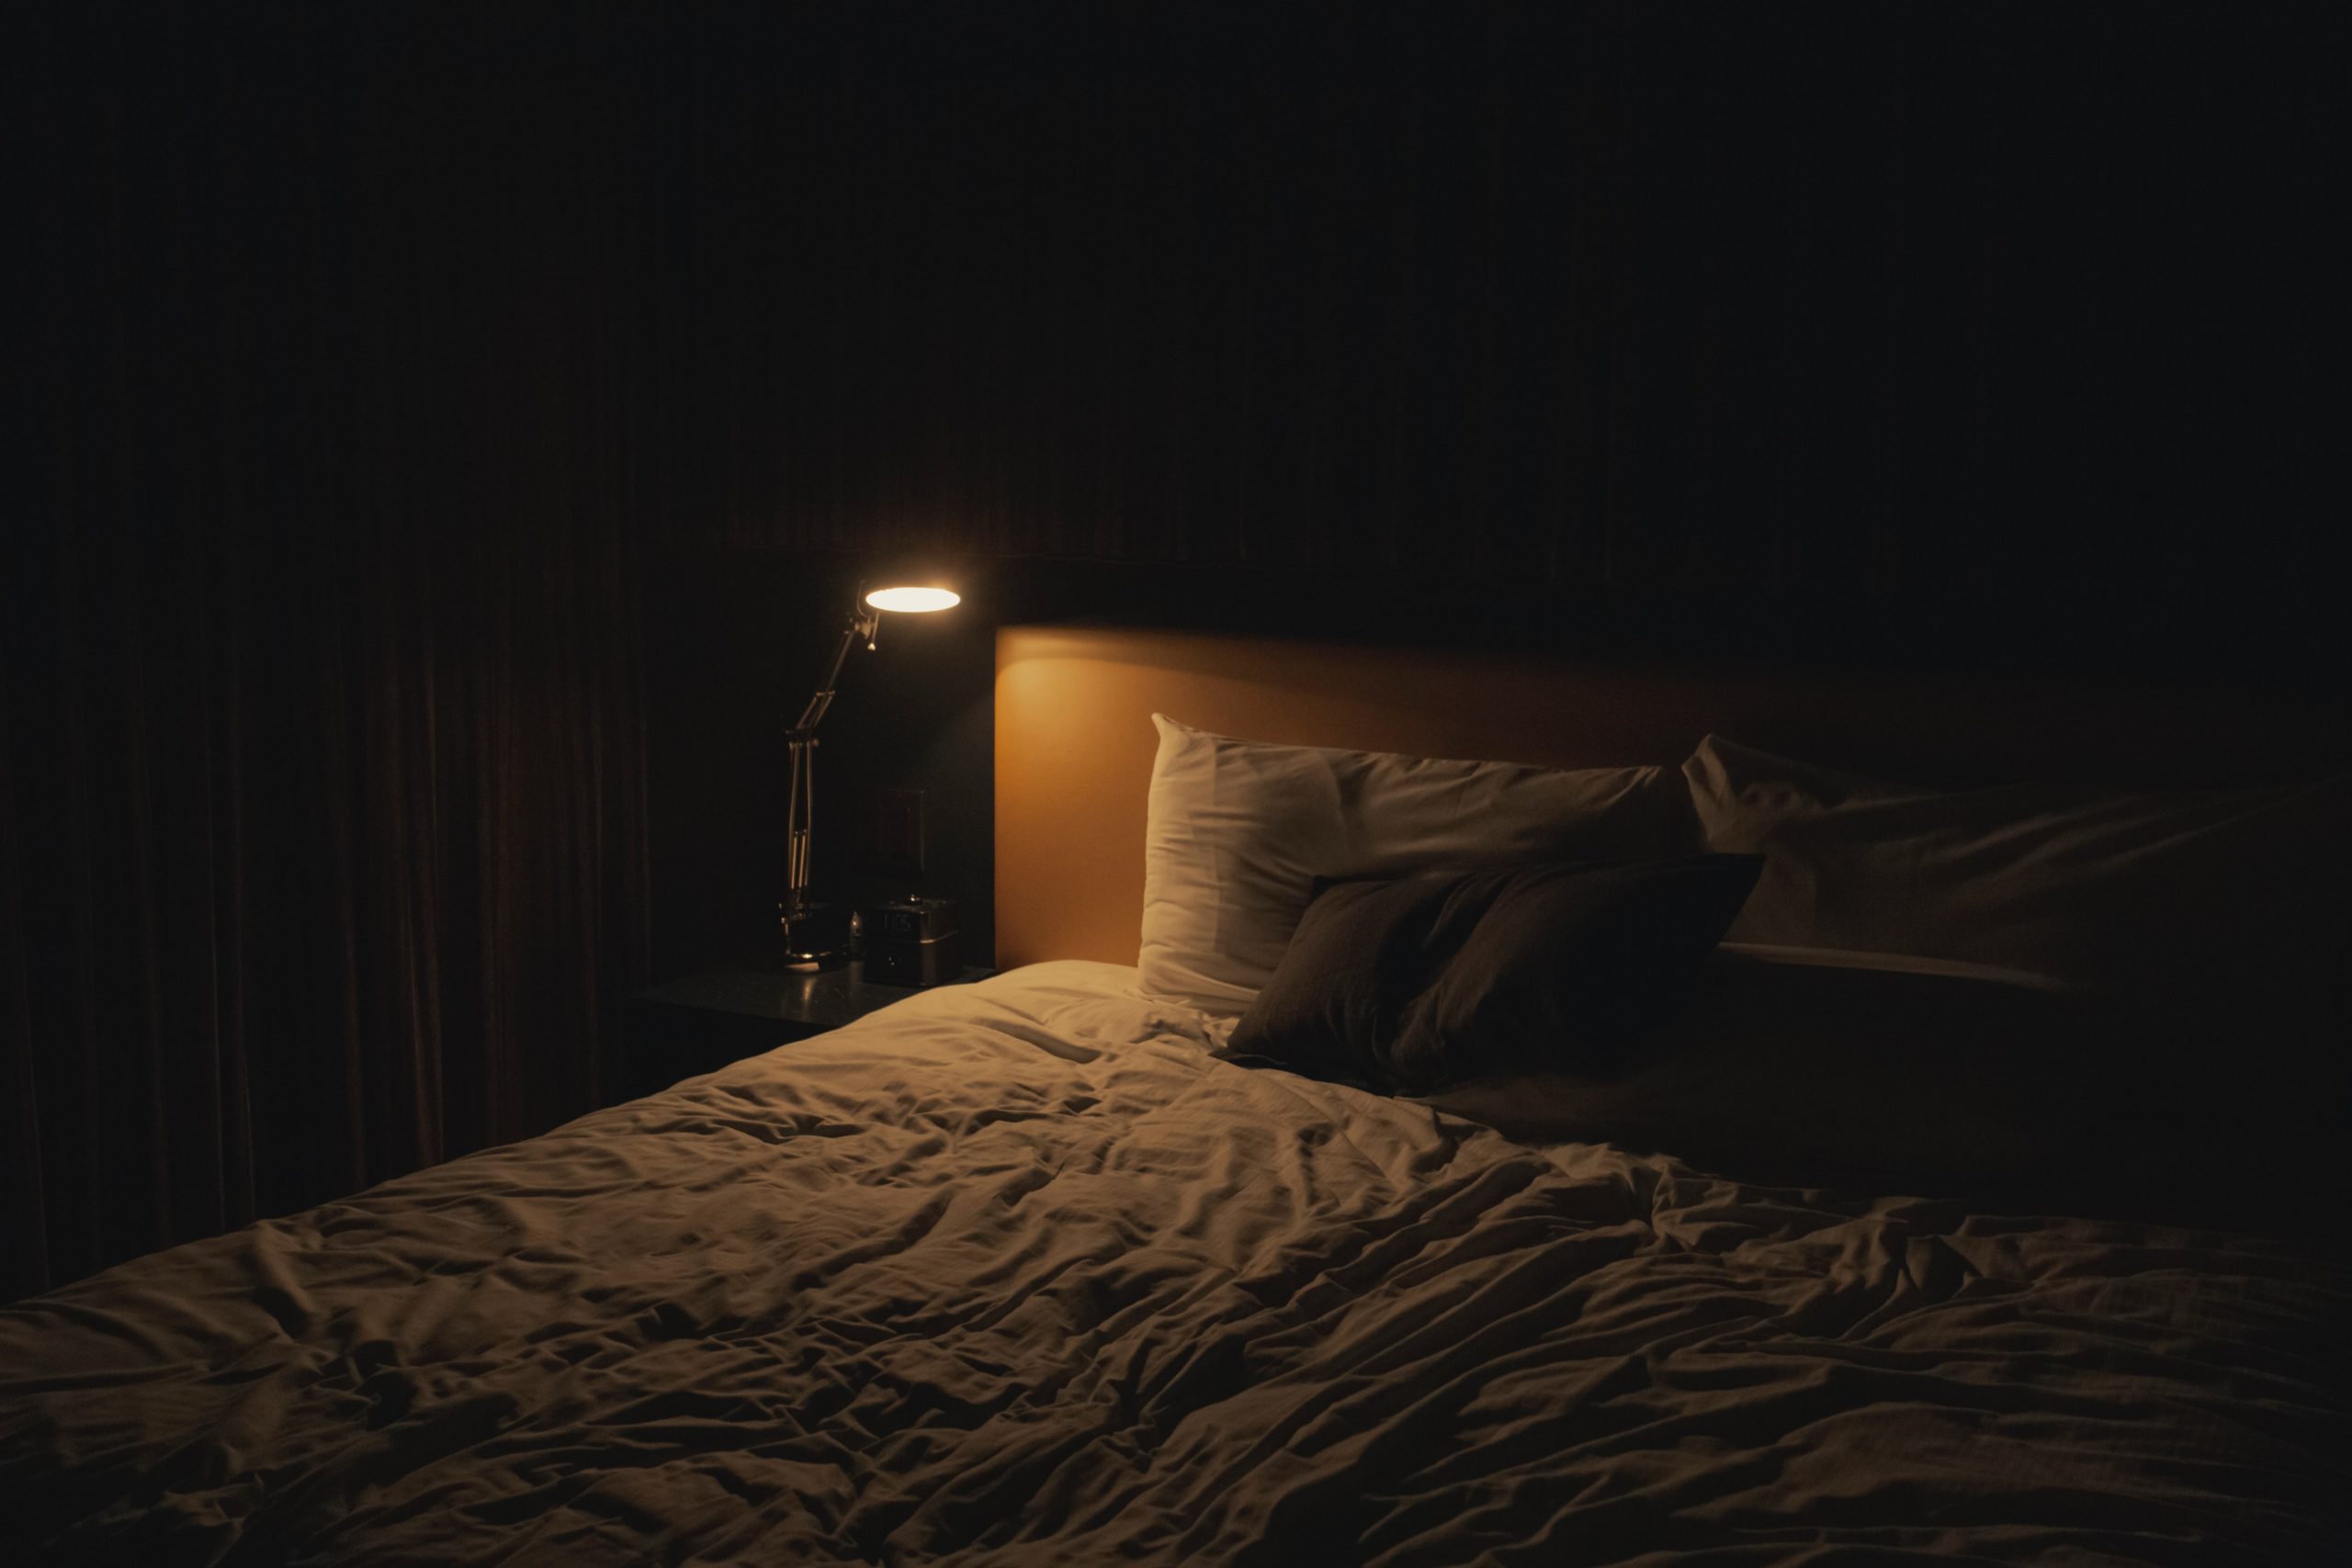 Bed in a dark room with a lamp on